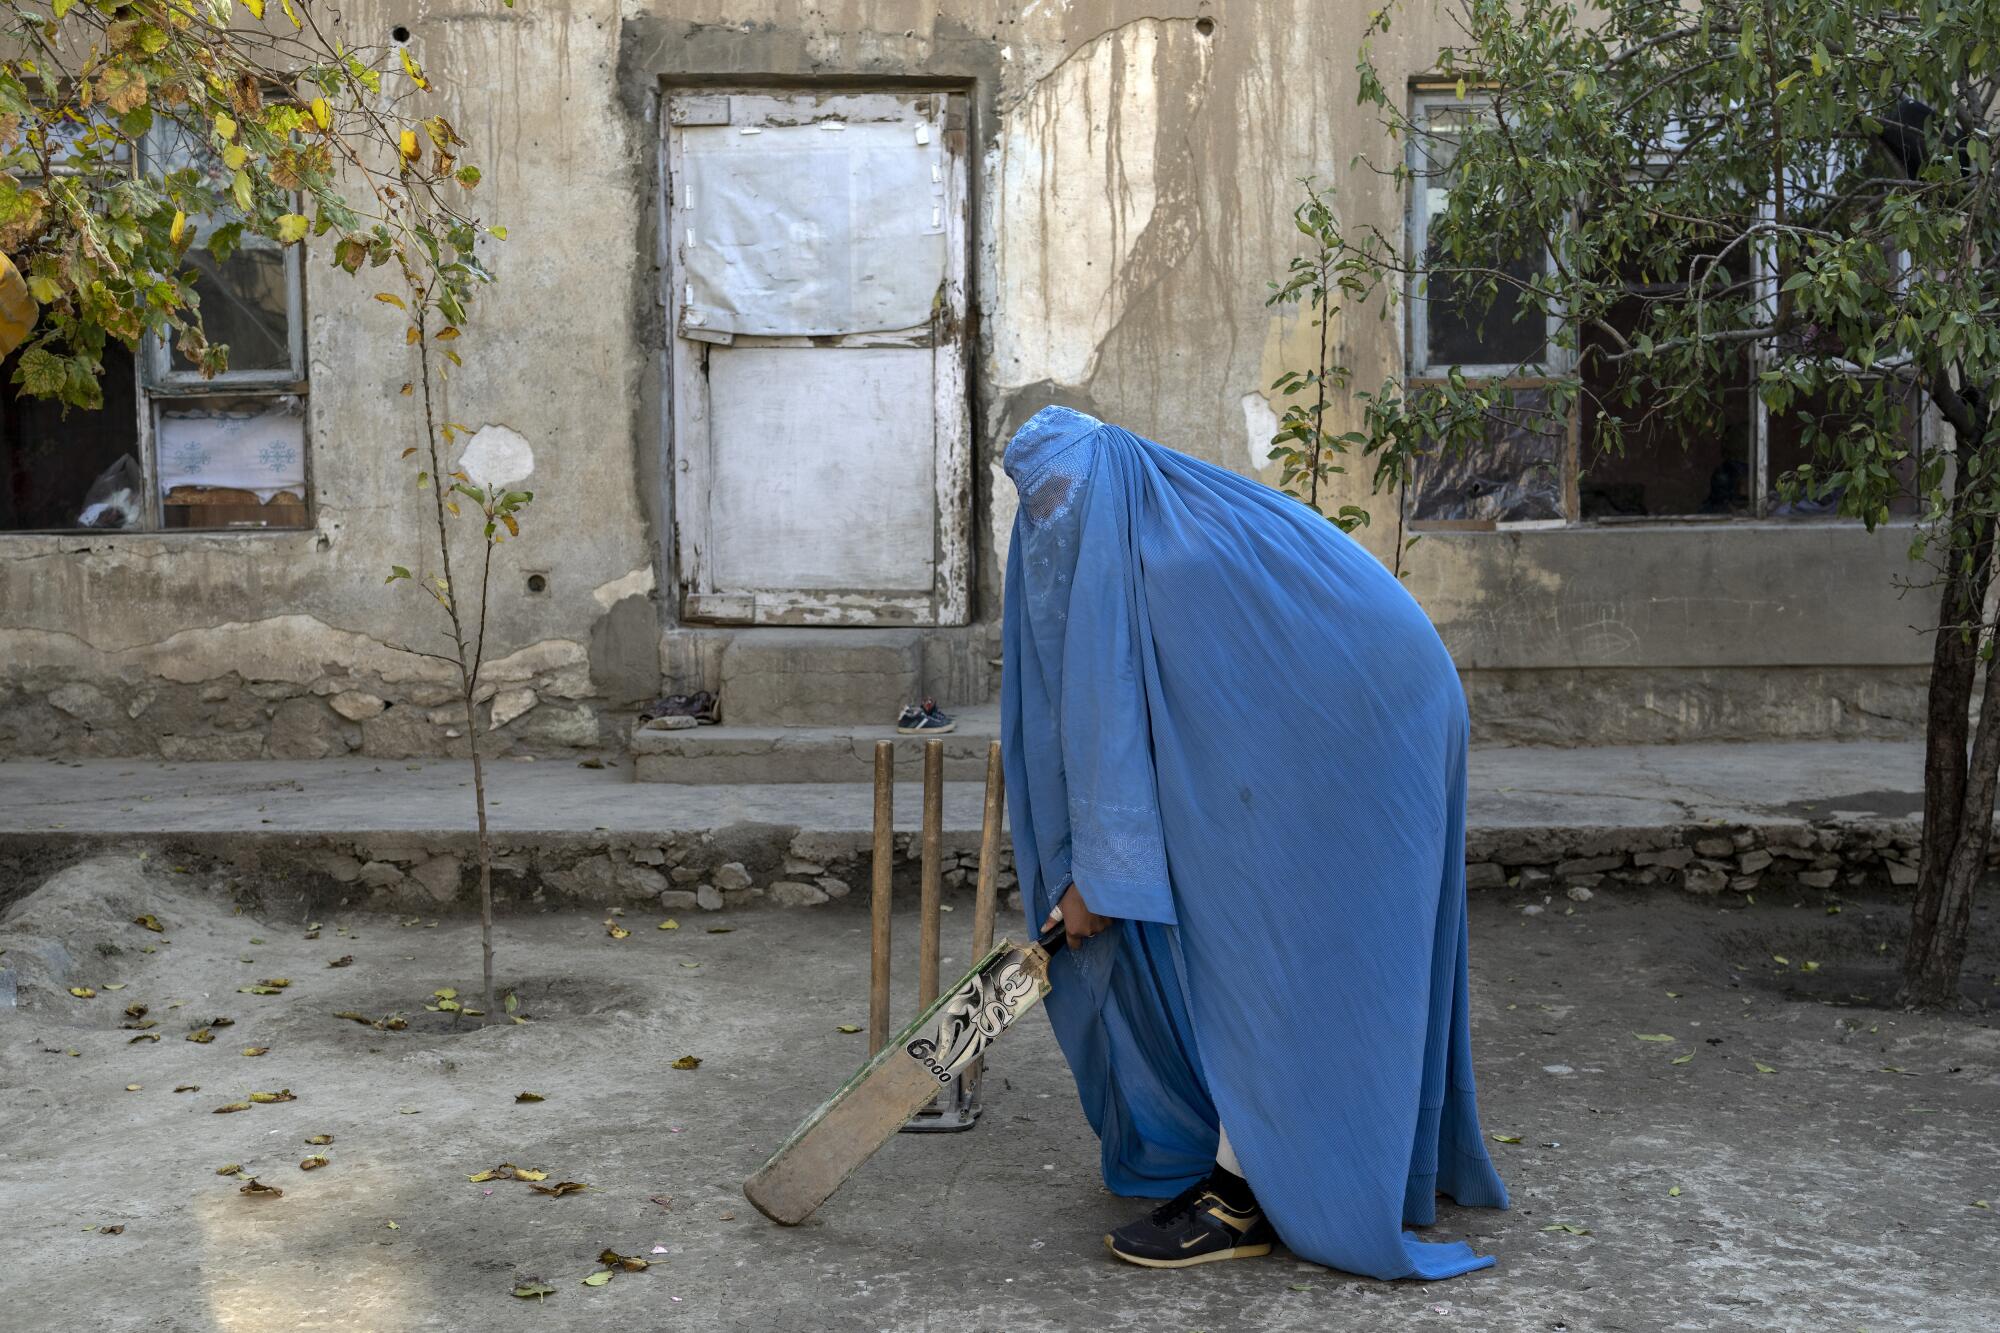 An Afghan woman poses for a photo with her cricket bat